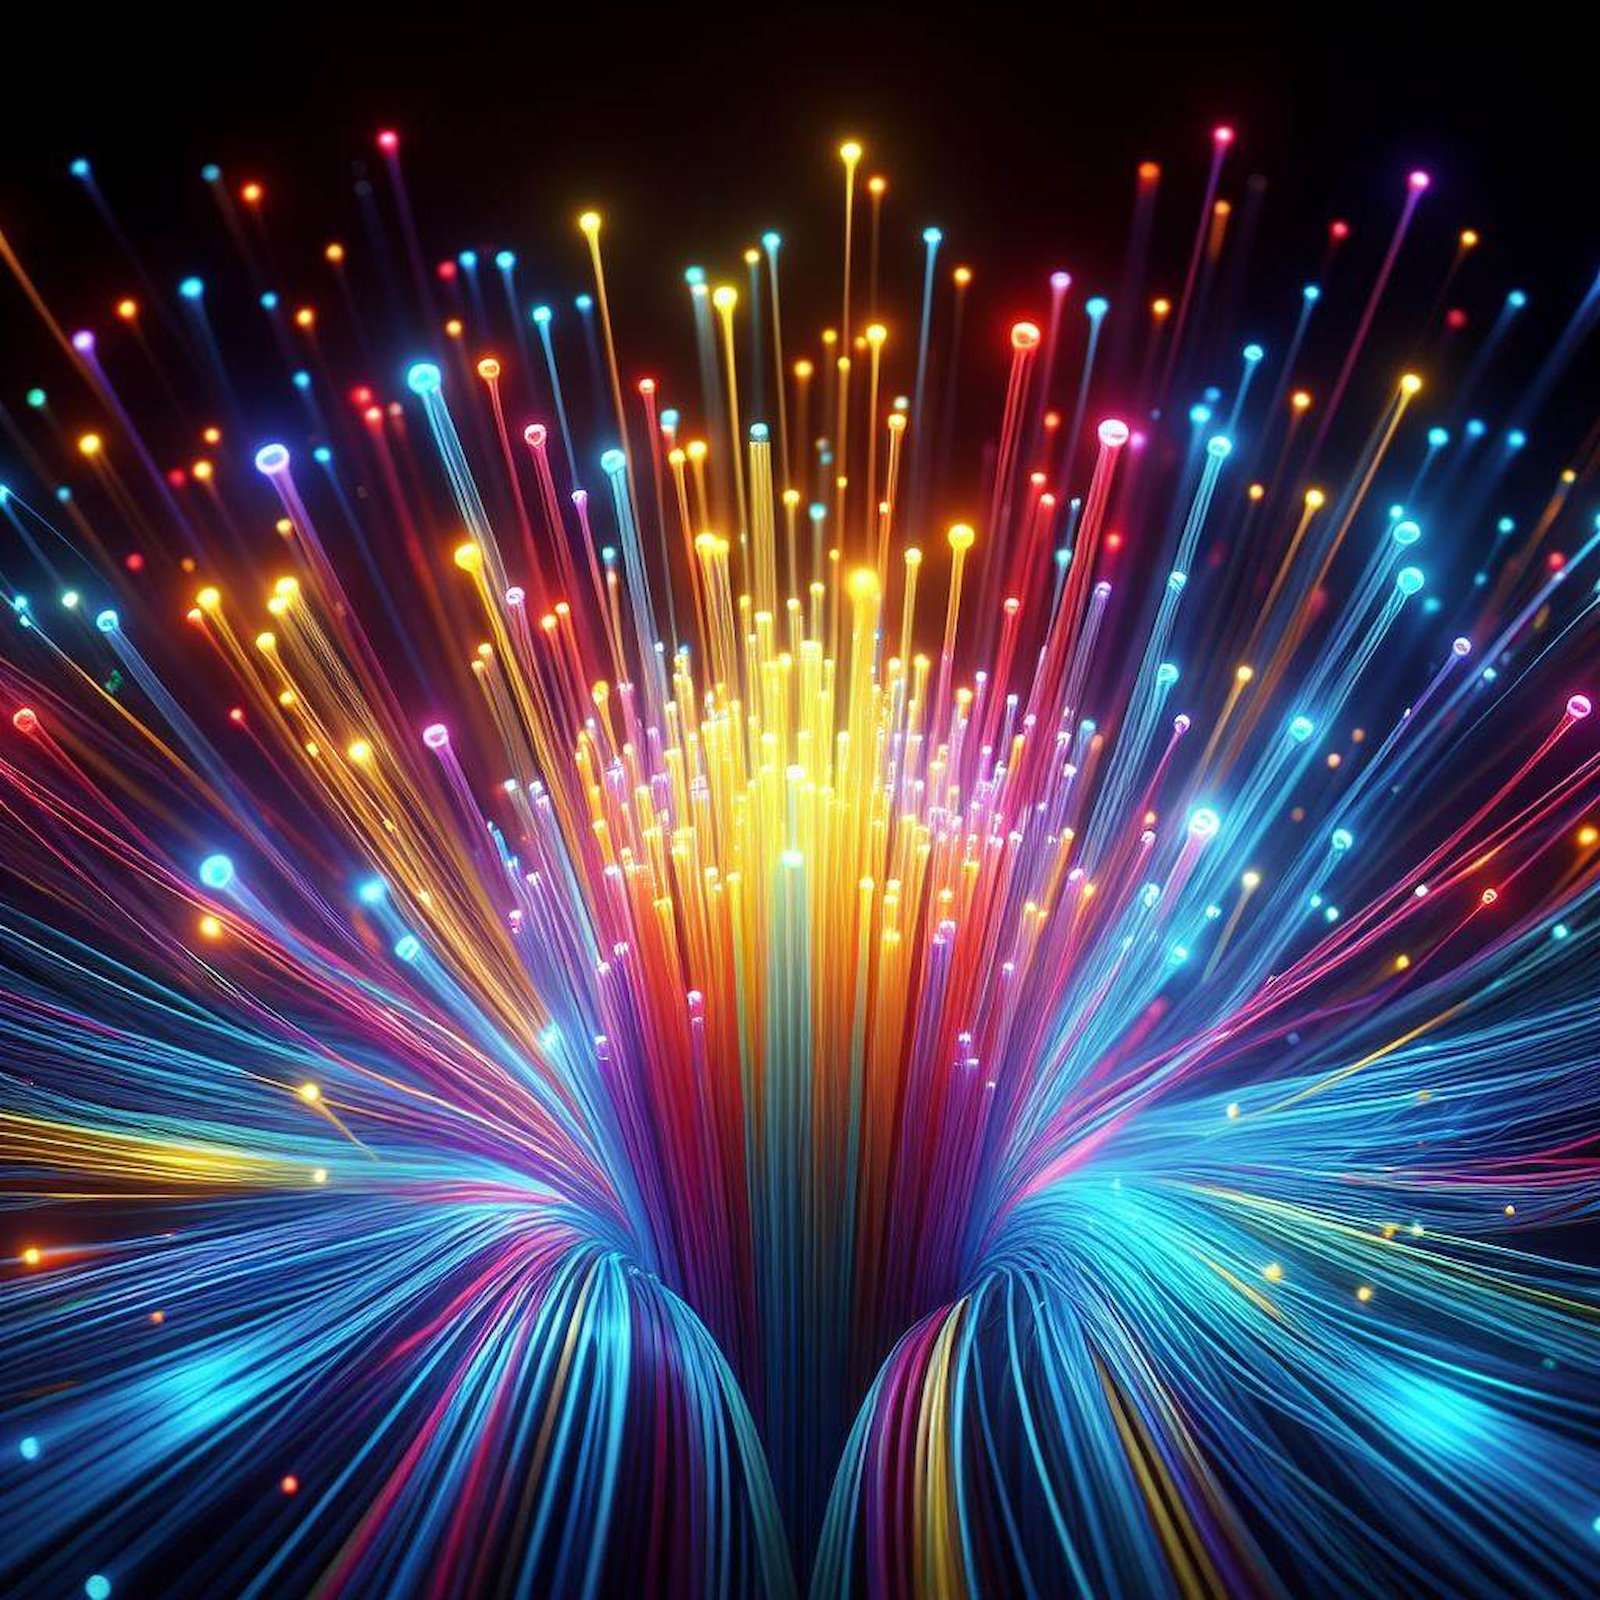 New record speed of 301 Tbps on a single fiber!